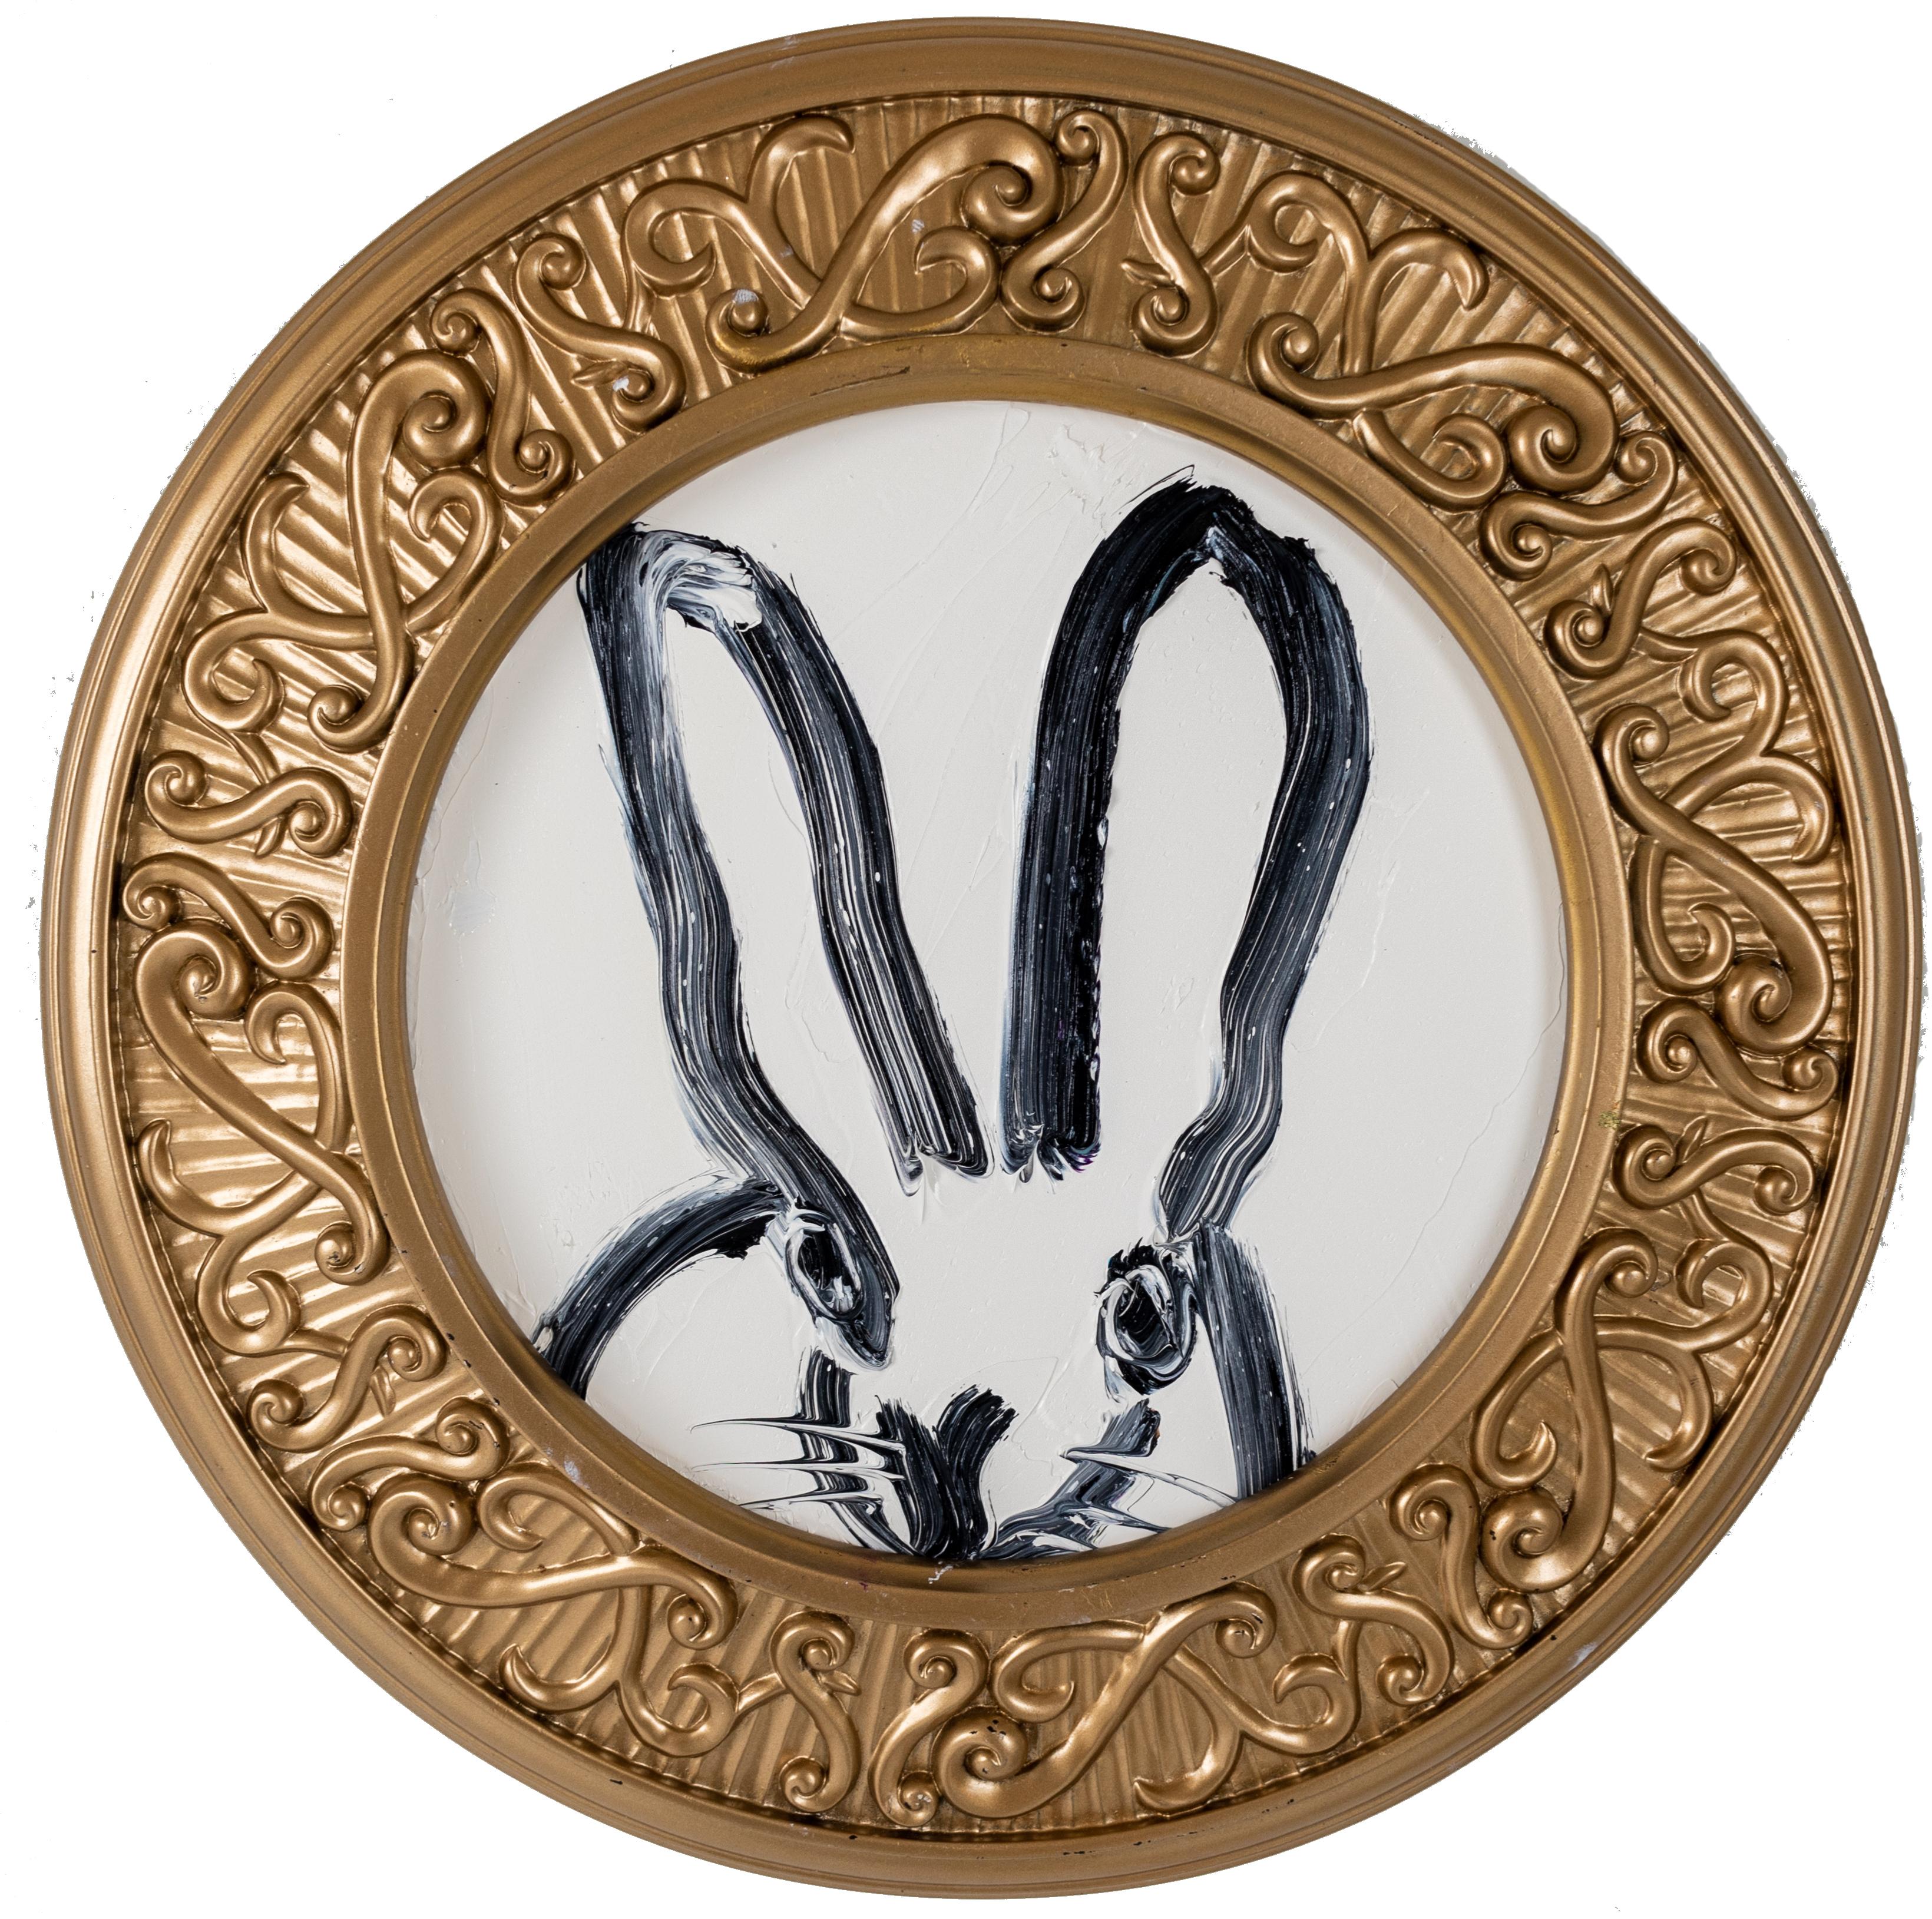 Hunt Slonem "Randy" Bunny
Black outlined  bunny on a white background in an antique circle frame

Unframed: 8 x 8 inches  
Framed: 12 x 11.5 inches
*Painting is framed - Please note that not all Hunt Slonem frames are not in mint condition. There